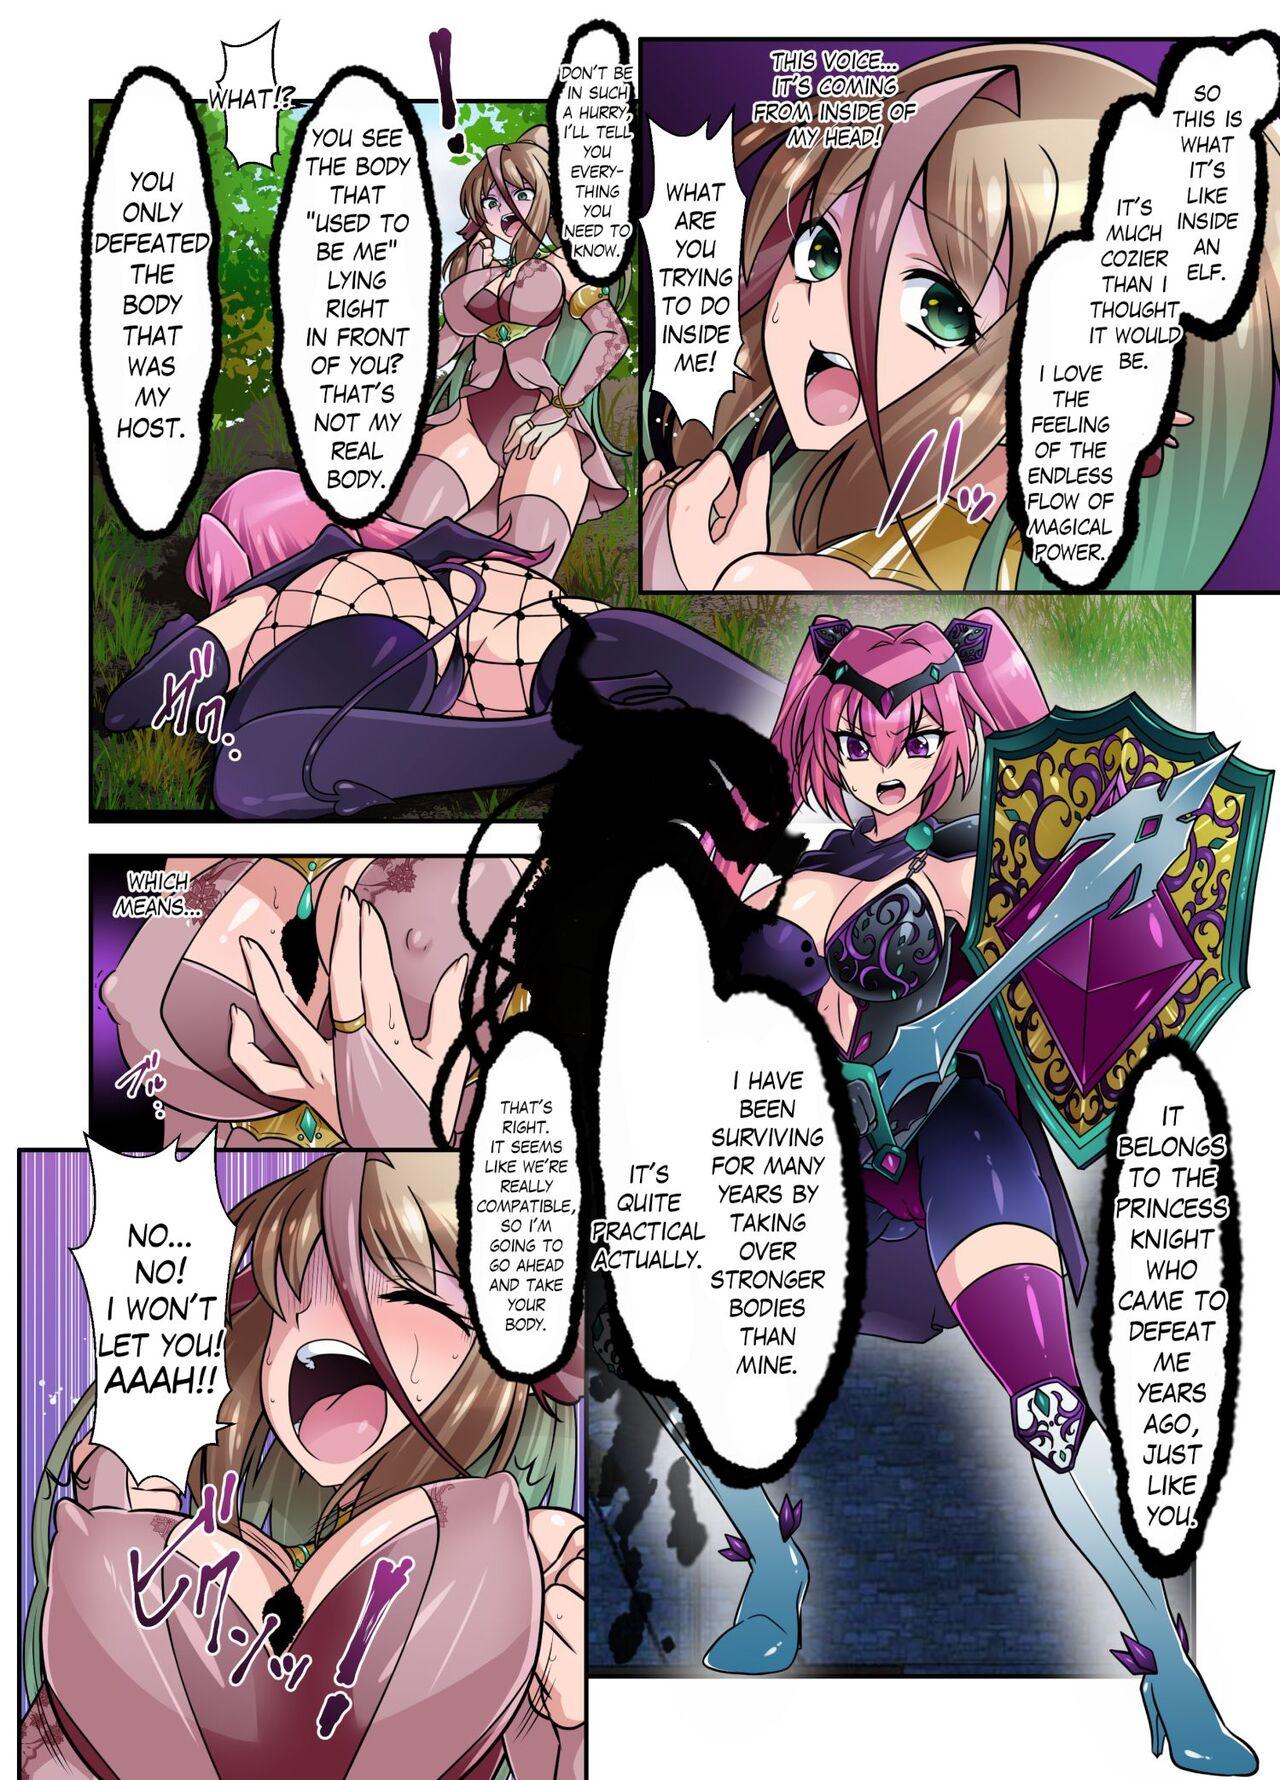 Amazing Elf Taken Over By Succubus Big Cocks - Page 3